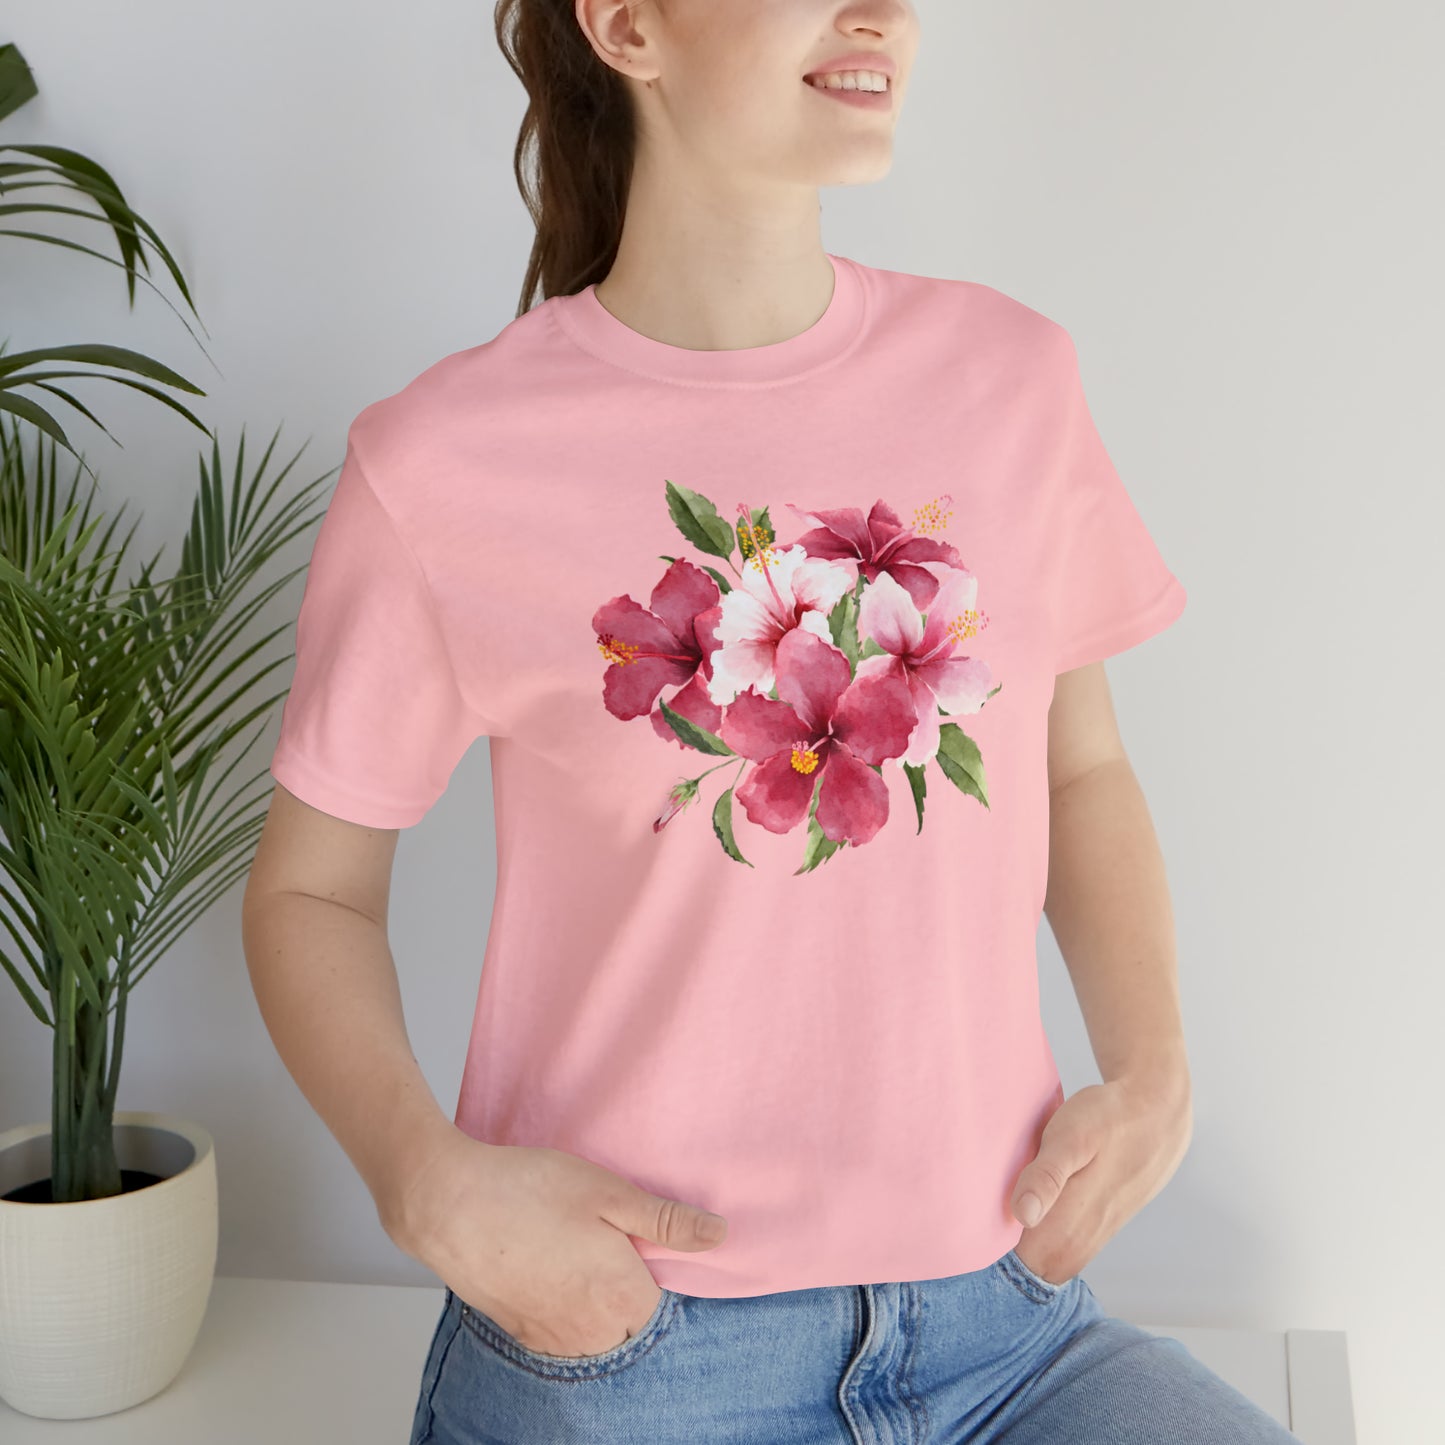 Mock up of a woman wearing the pink shirt while sitting on a surface